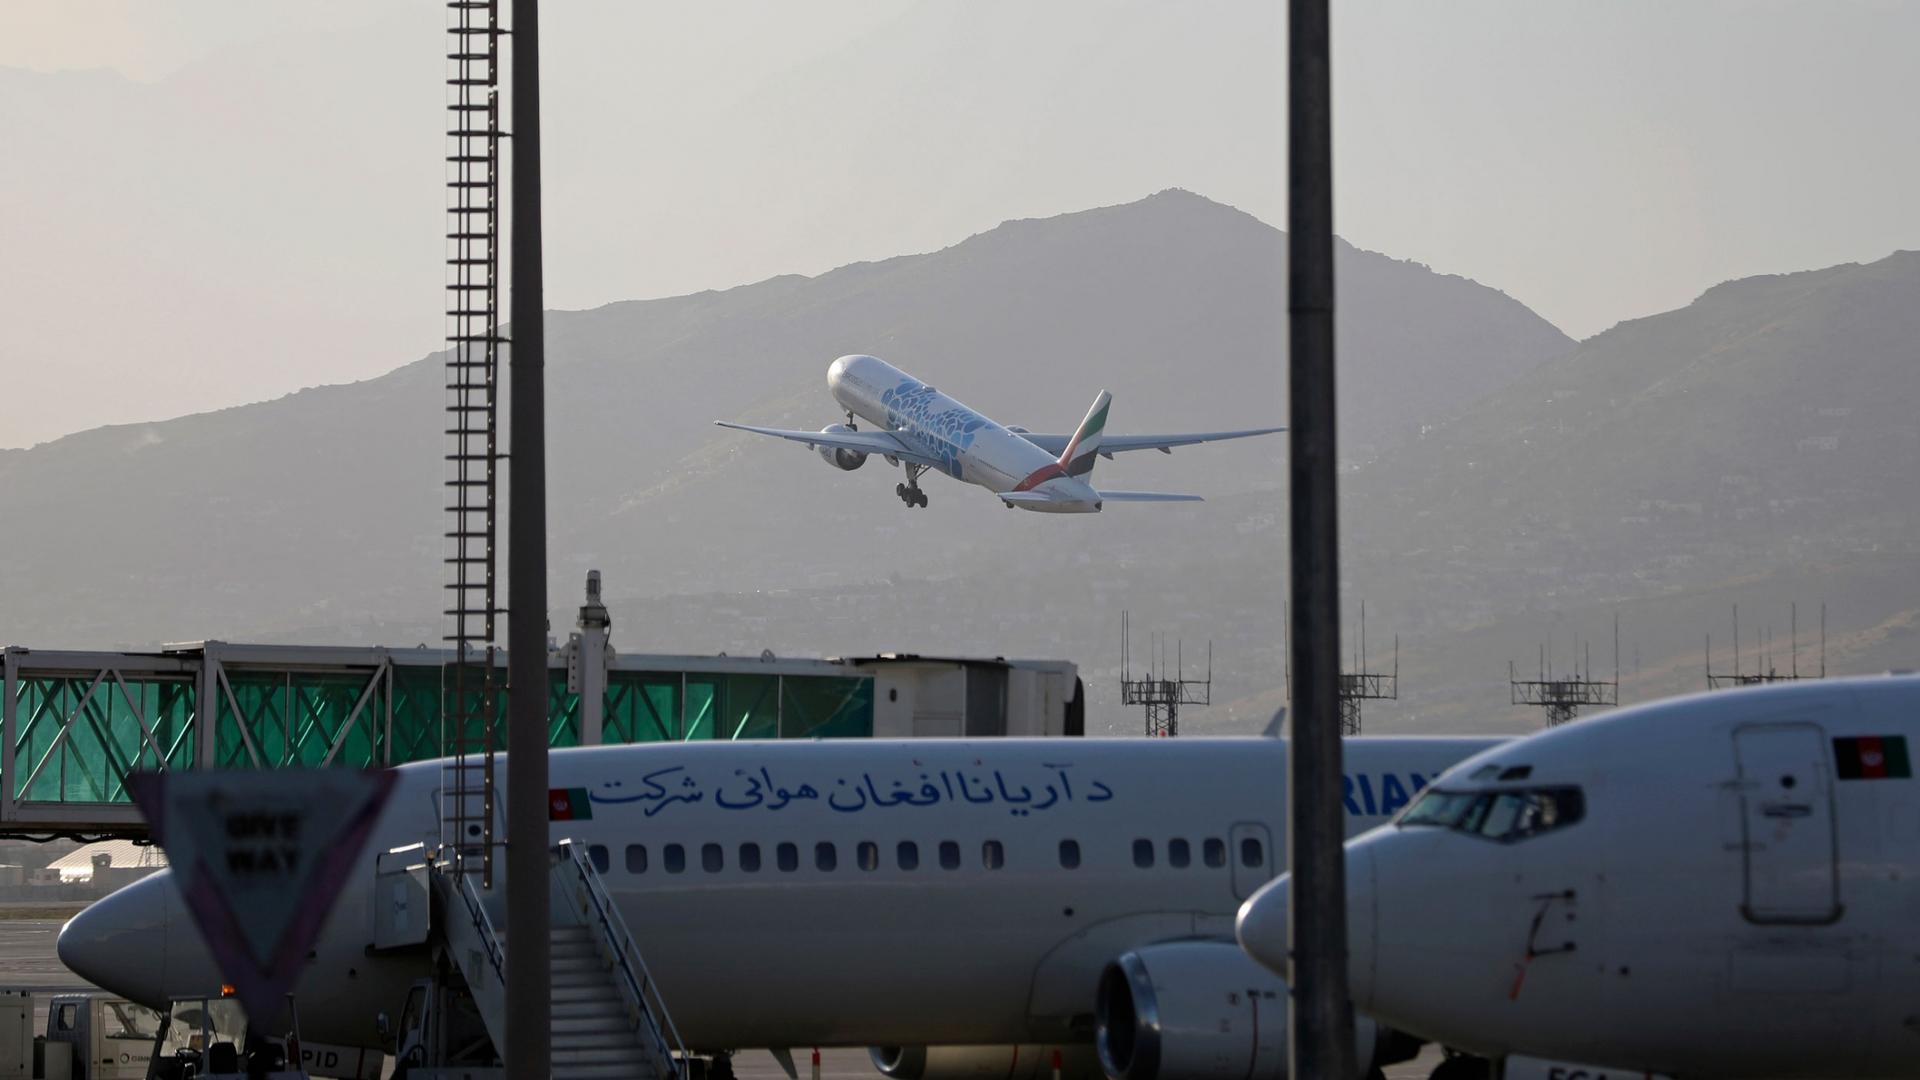 A plane takes off from Hamid Karzai International Airport in Kabul, Afghanistan, Sunday, July 4, 2021.